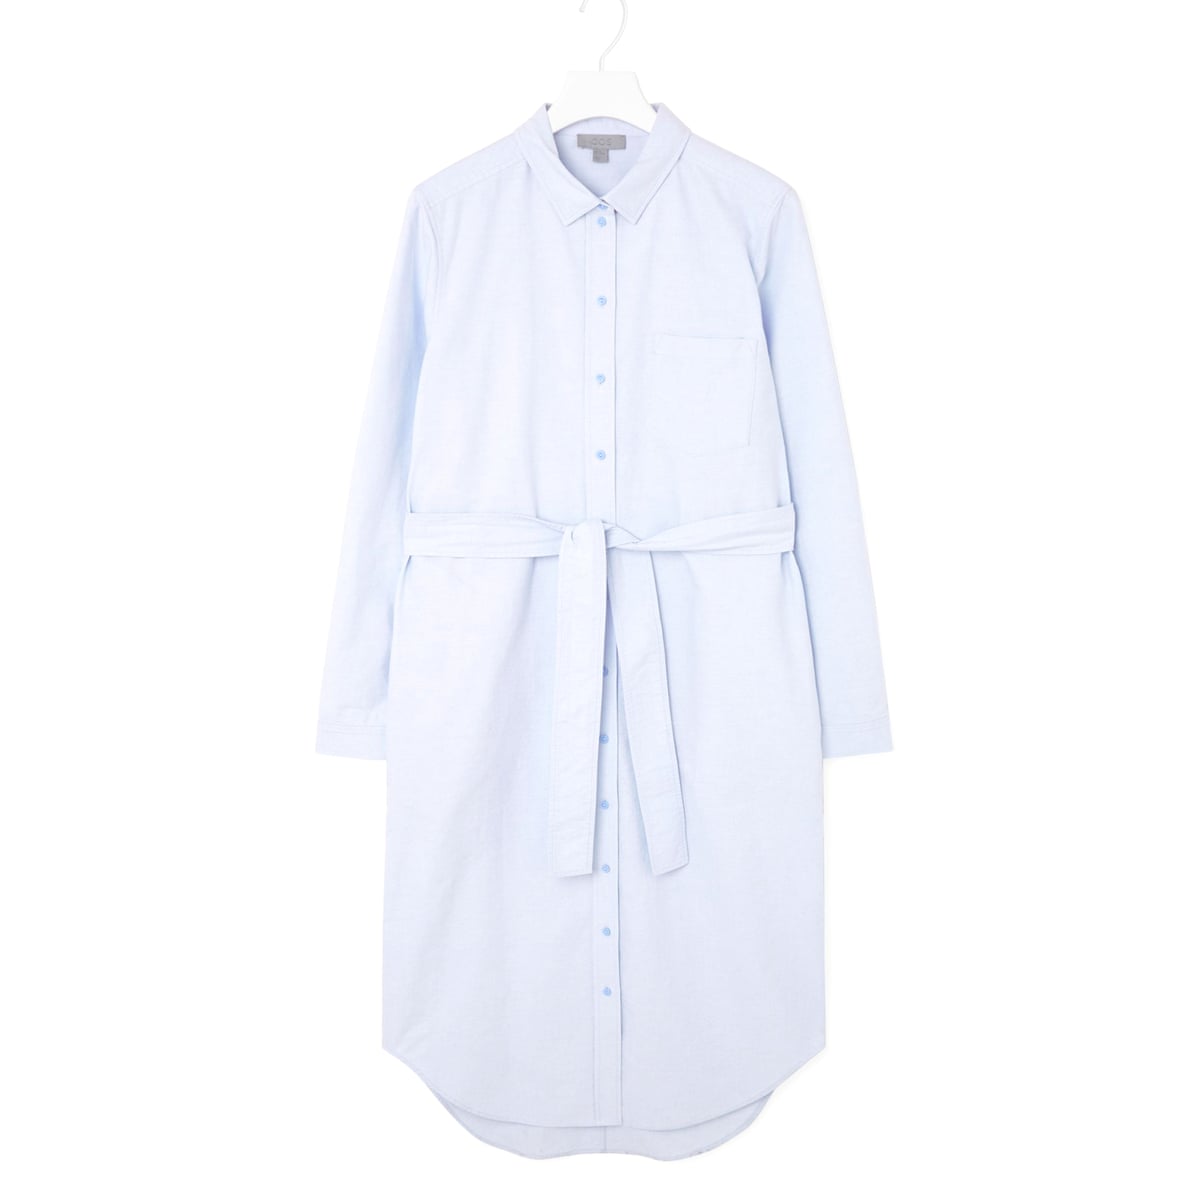 Summer dresses with sleeves: 10 of the best | Fashion | The Guardian